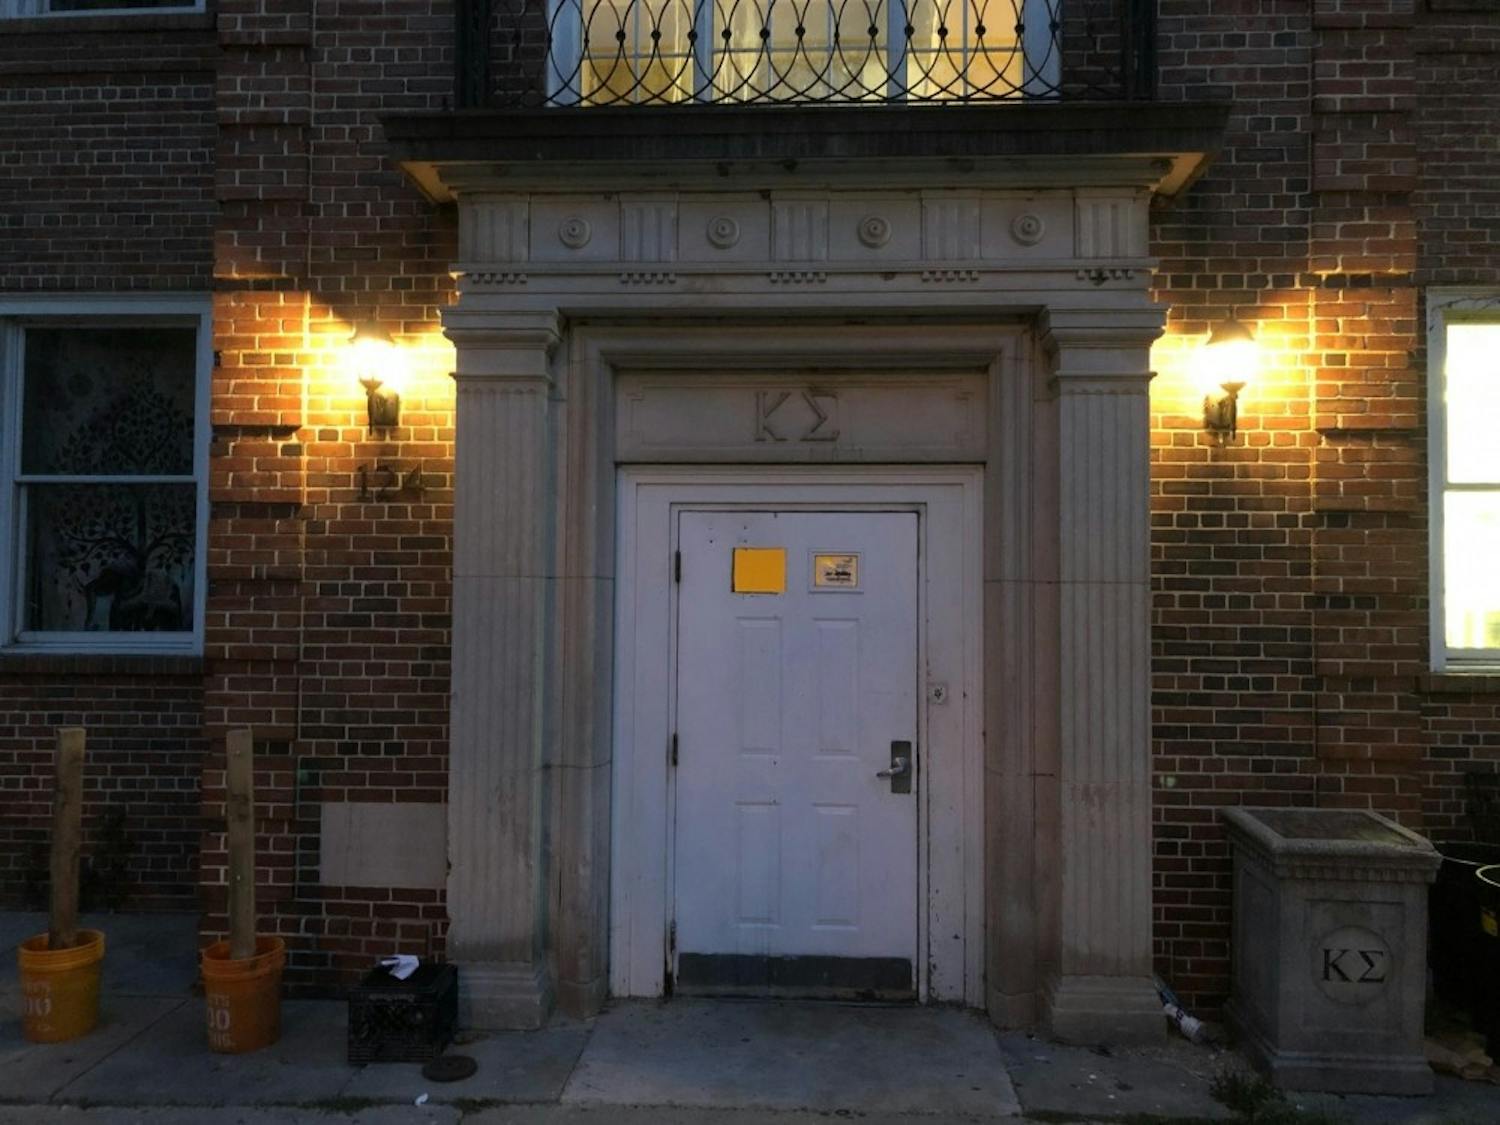 UW-Madison's Kappa Sigma Fraternity suspended after incident at house party.&nbsp;